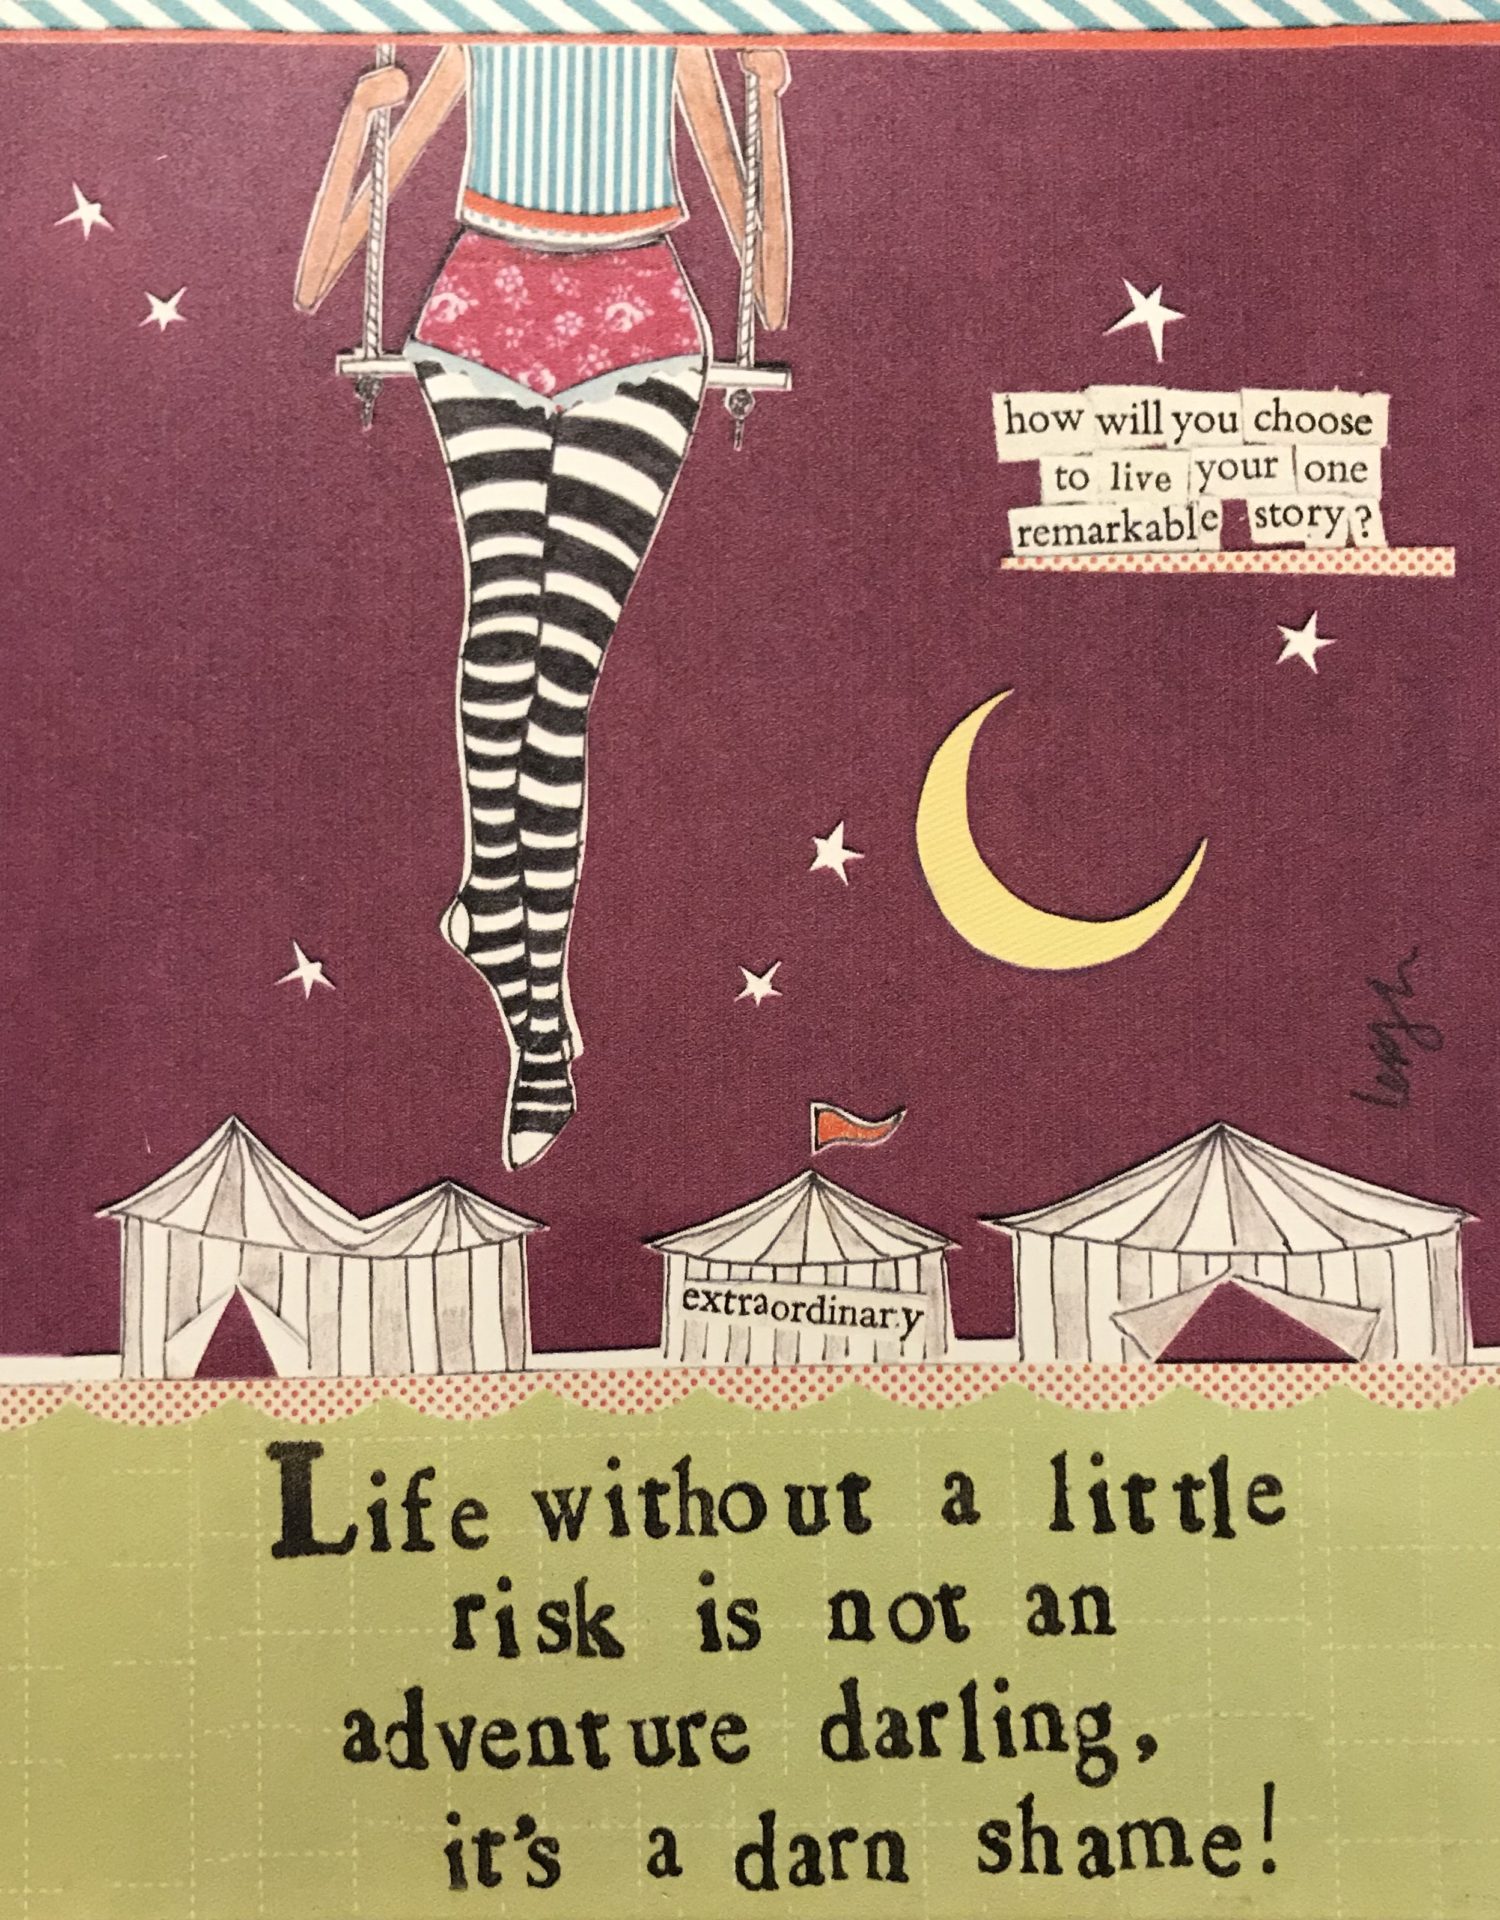 life without a little risk is not an adventure darling, it's a darn shame!